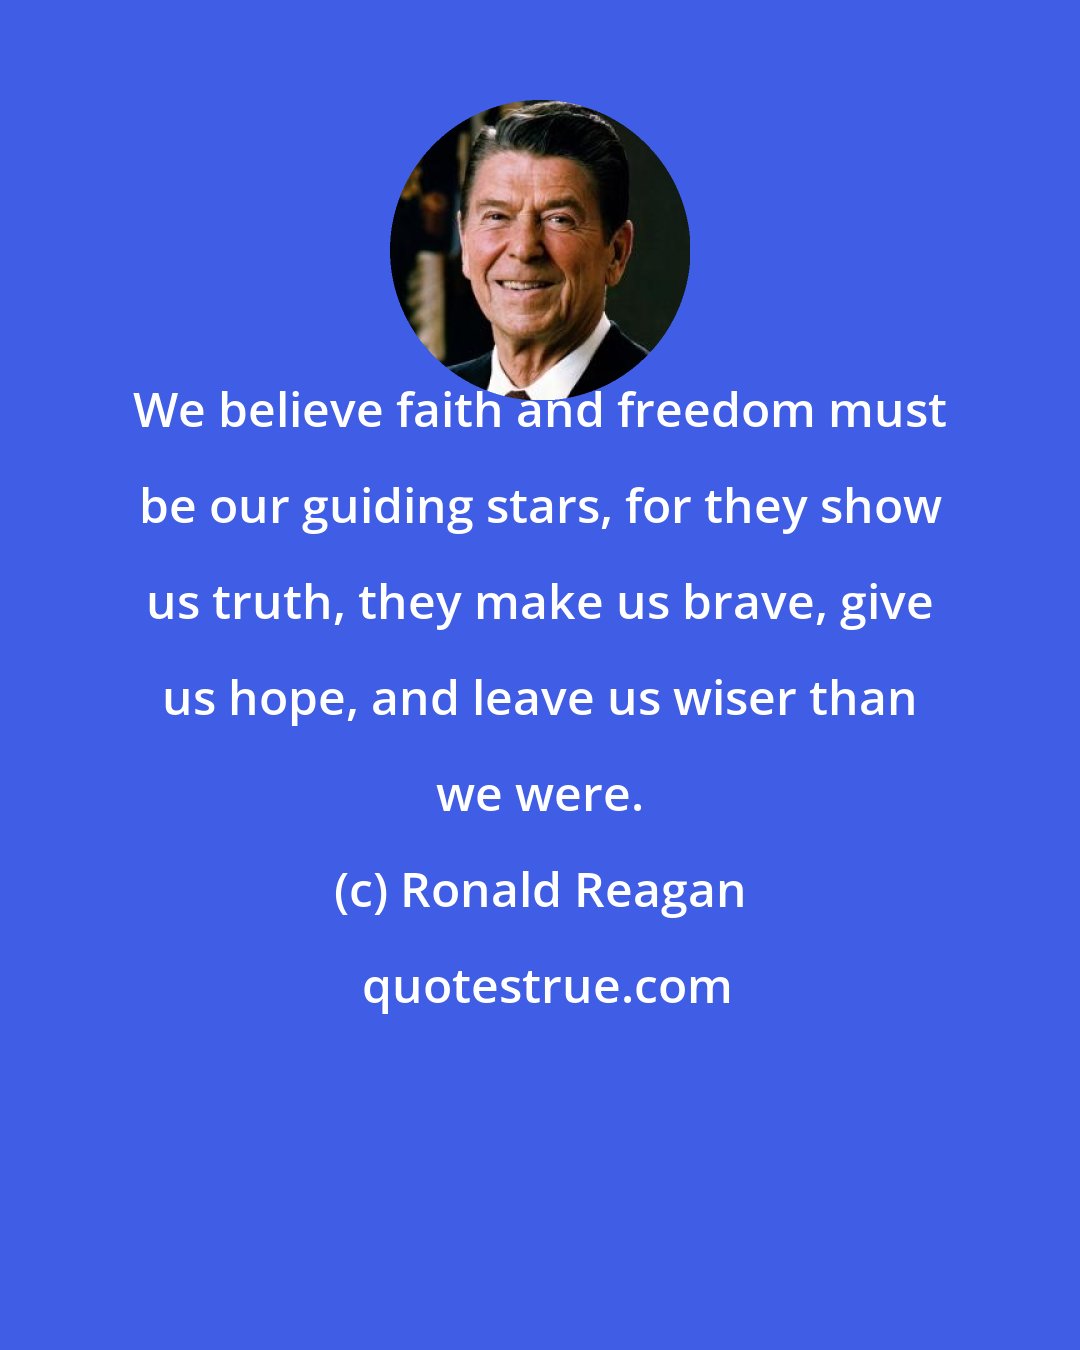 Ronald Reagan: We believe faith and freedom must be our guiding stars, for they show us truth, they make us brave, give us hope, and leave us wiser than we were.